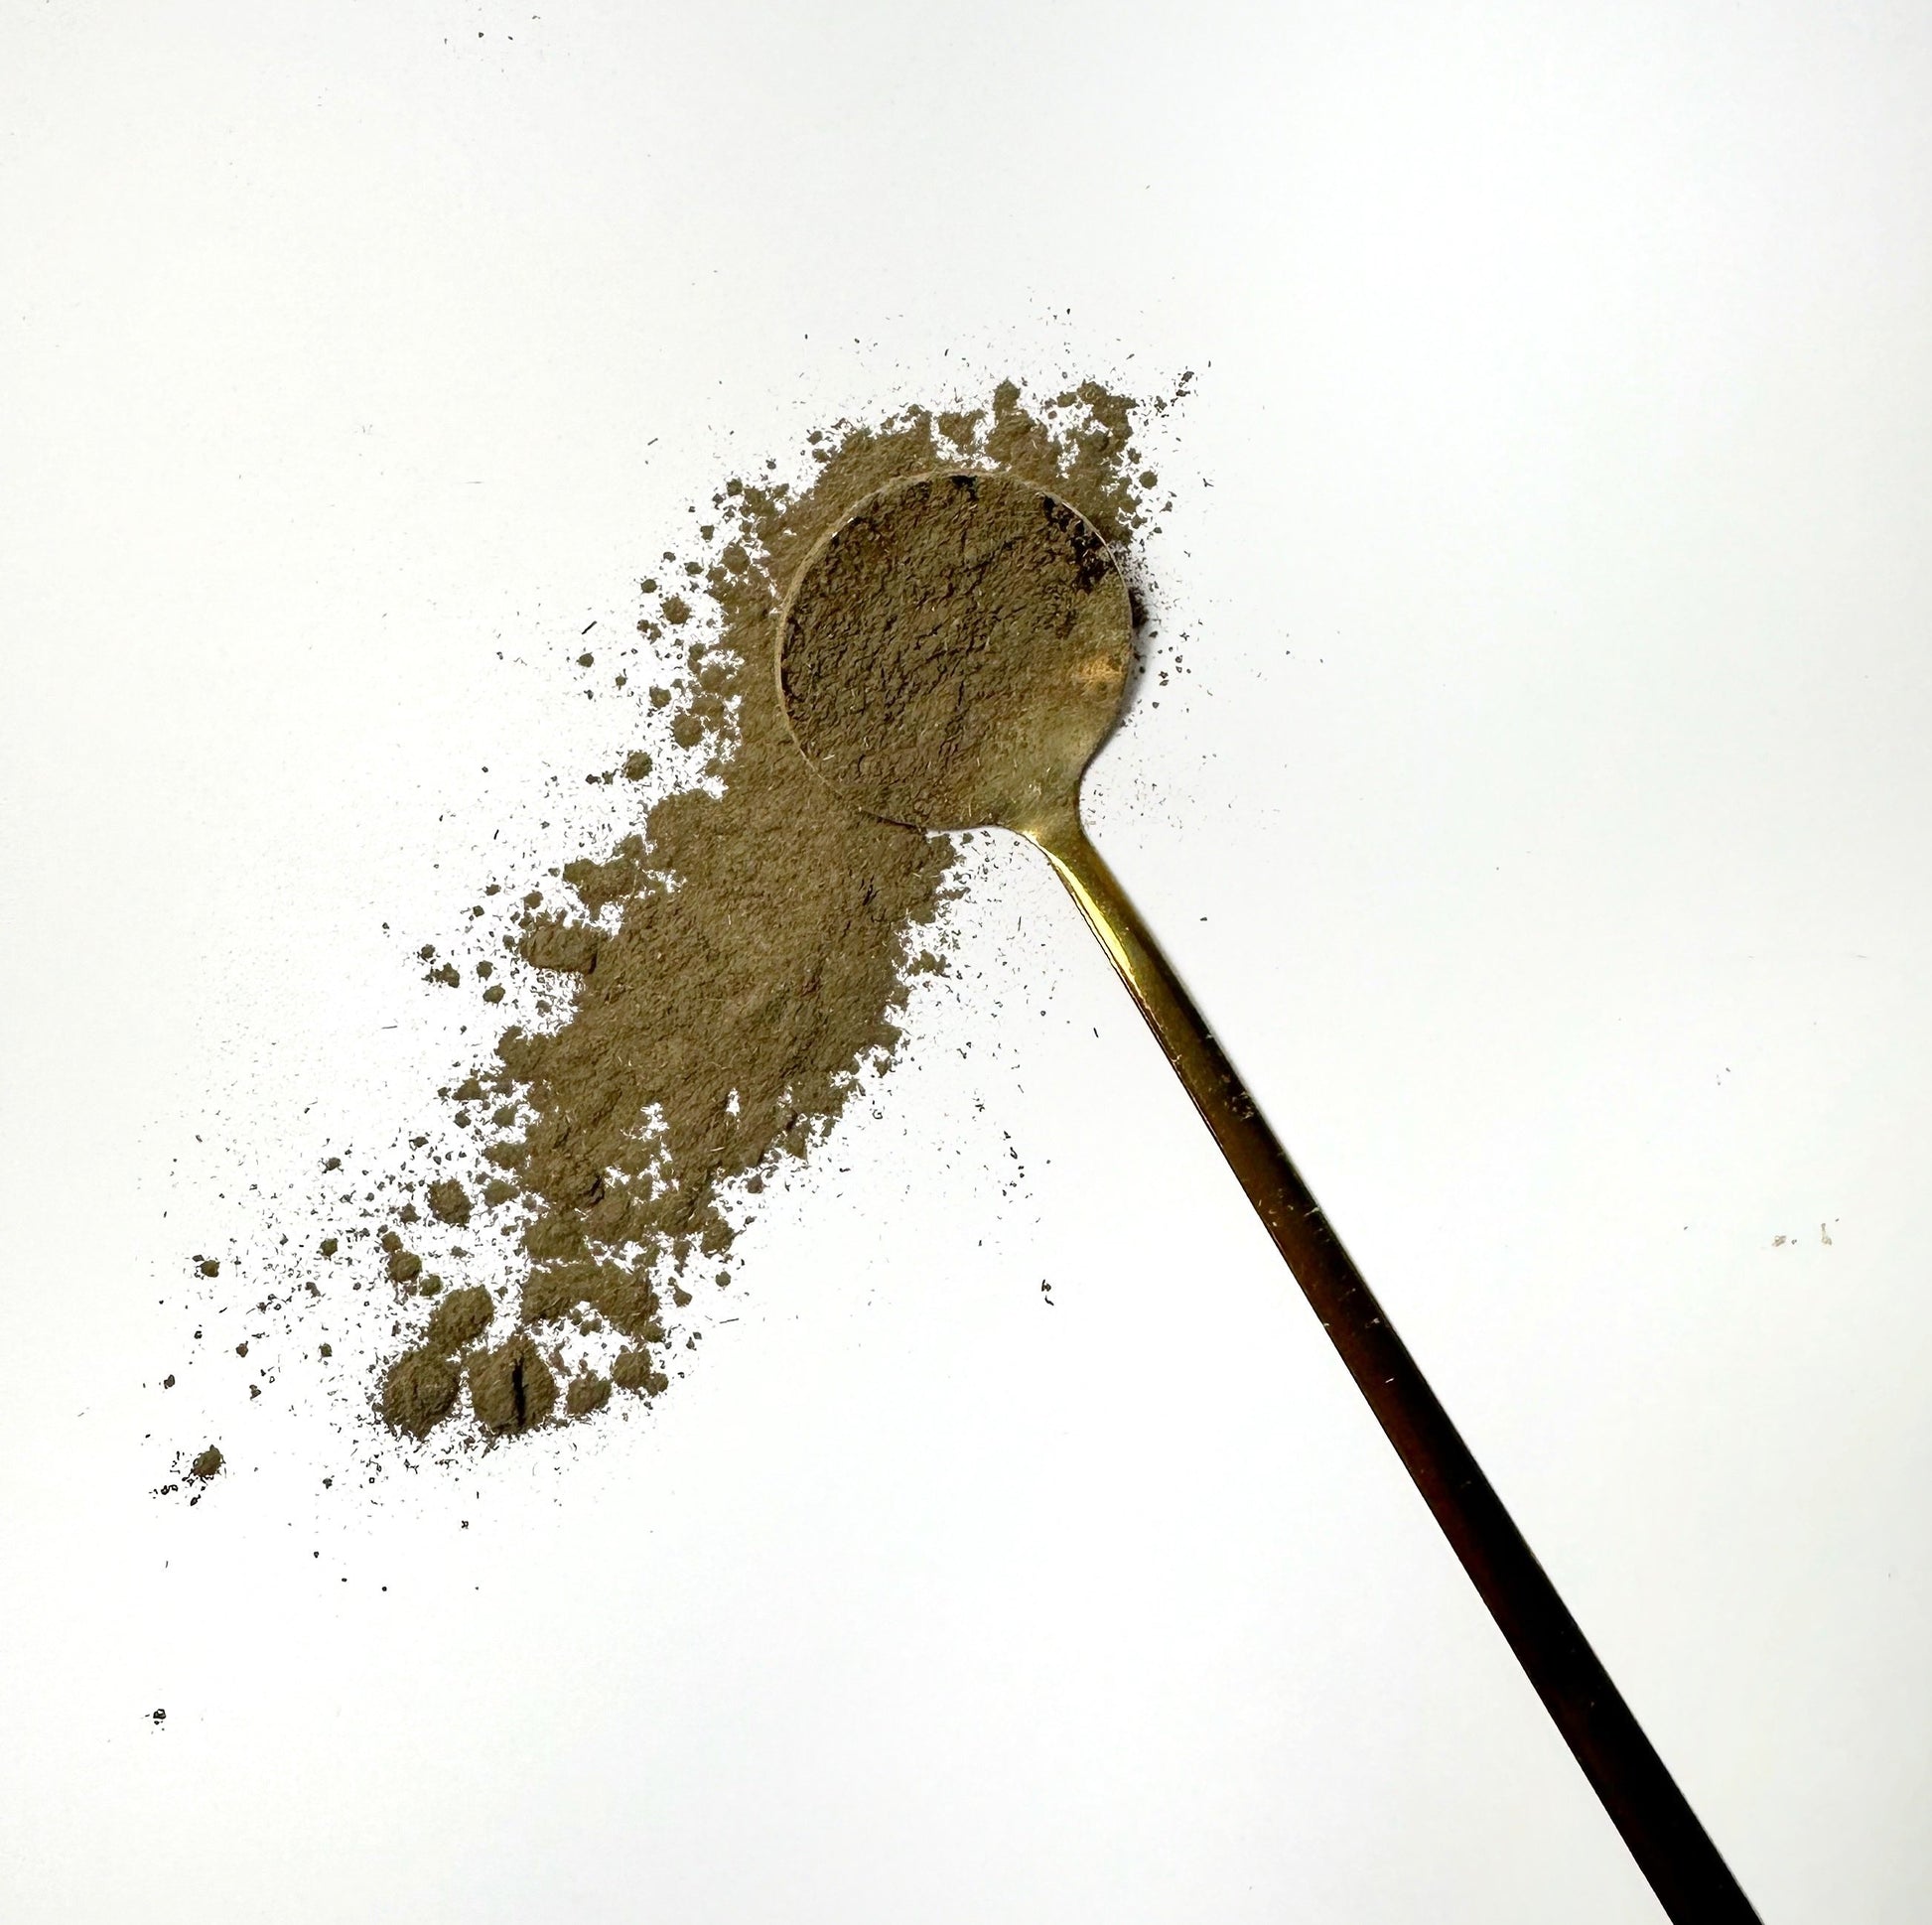 Adri Wellness's fine organic Bhringraj (False Daisy) powder scattered on a white surface with a golden spoon